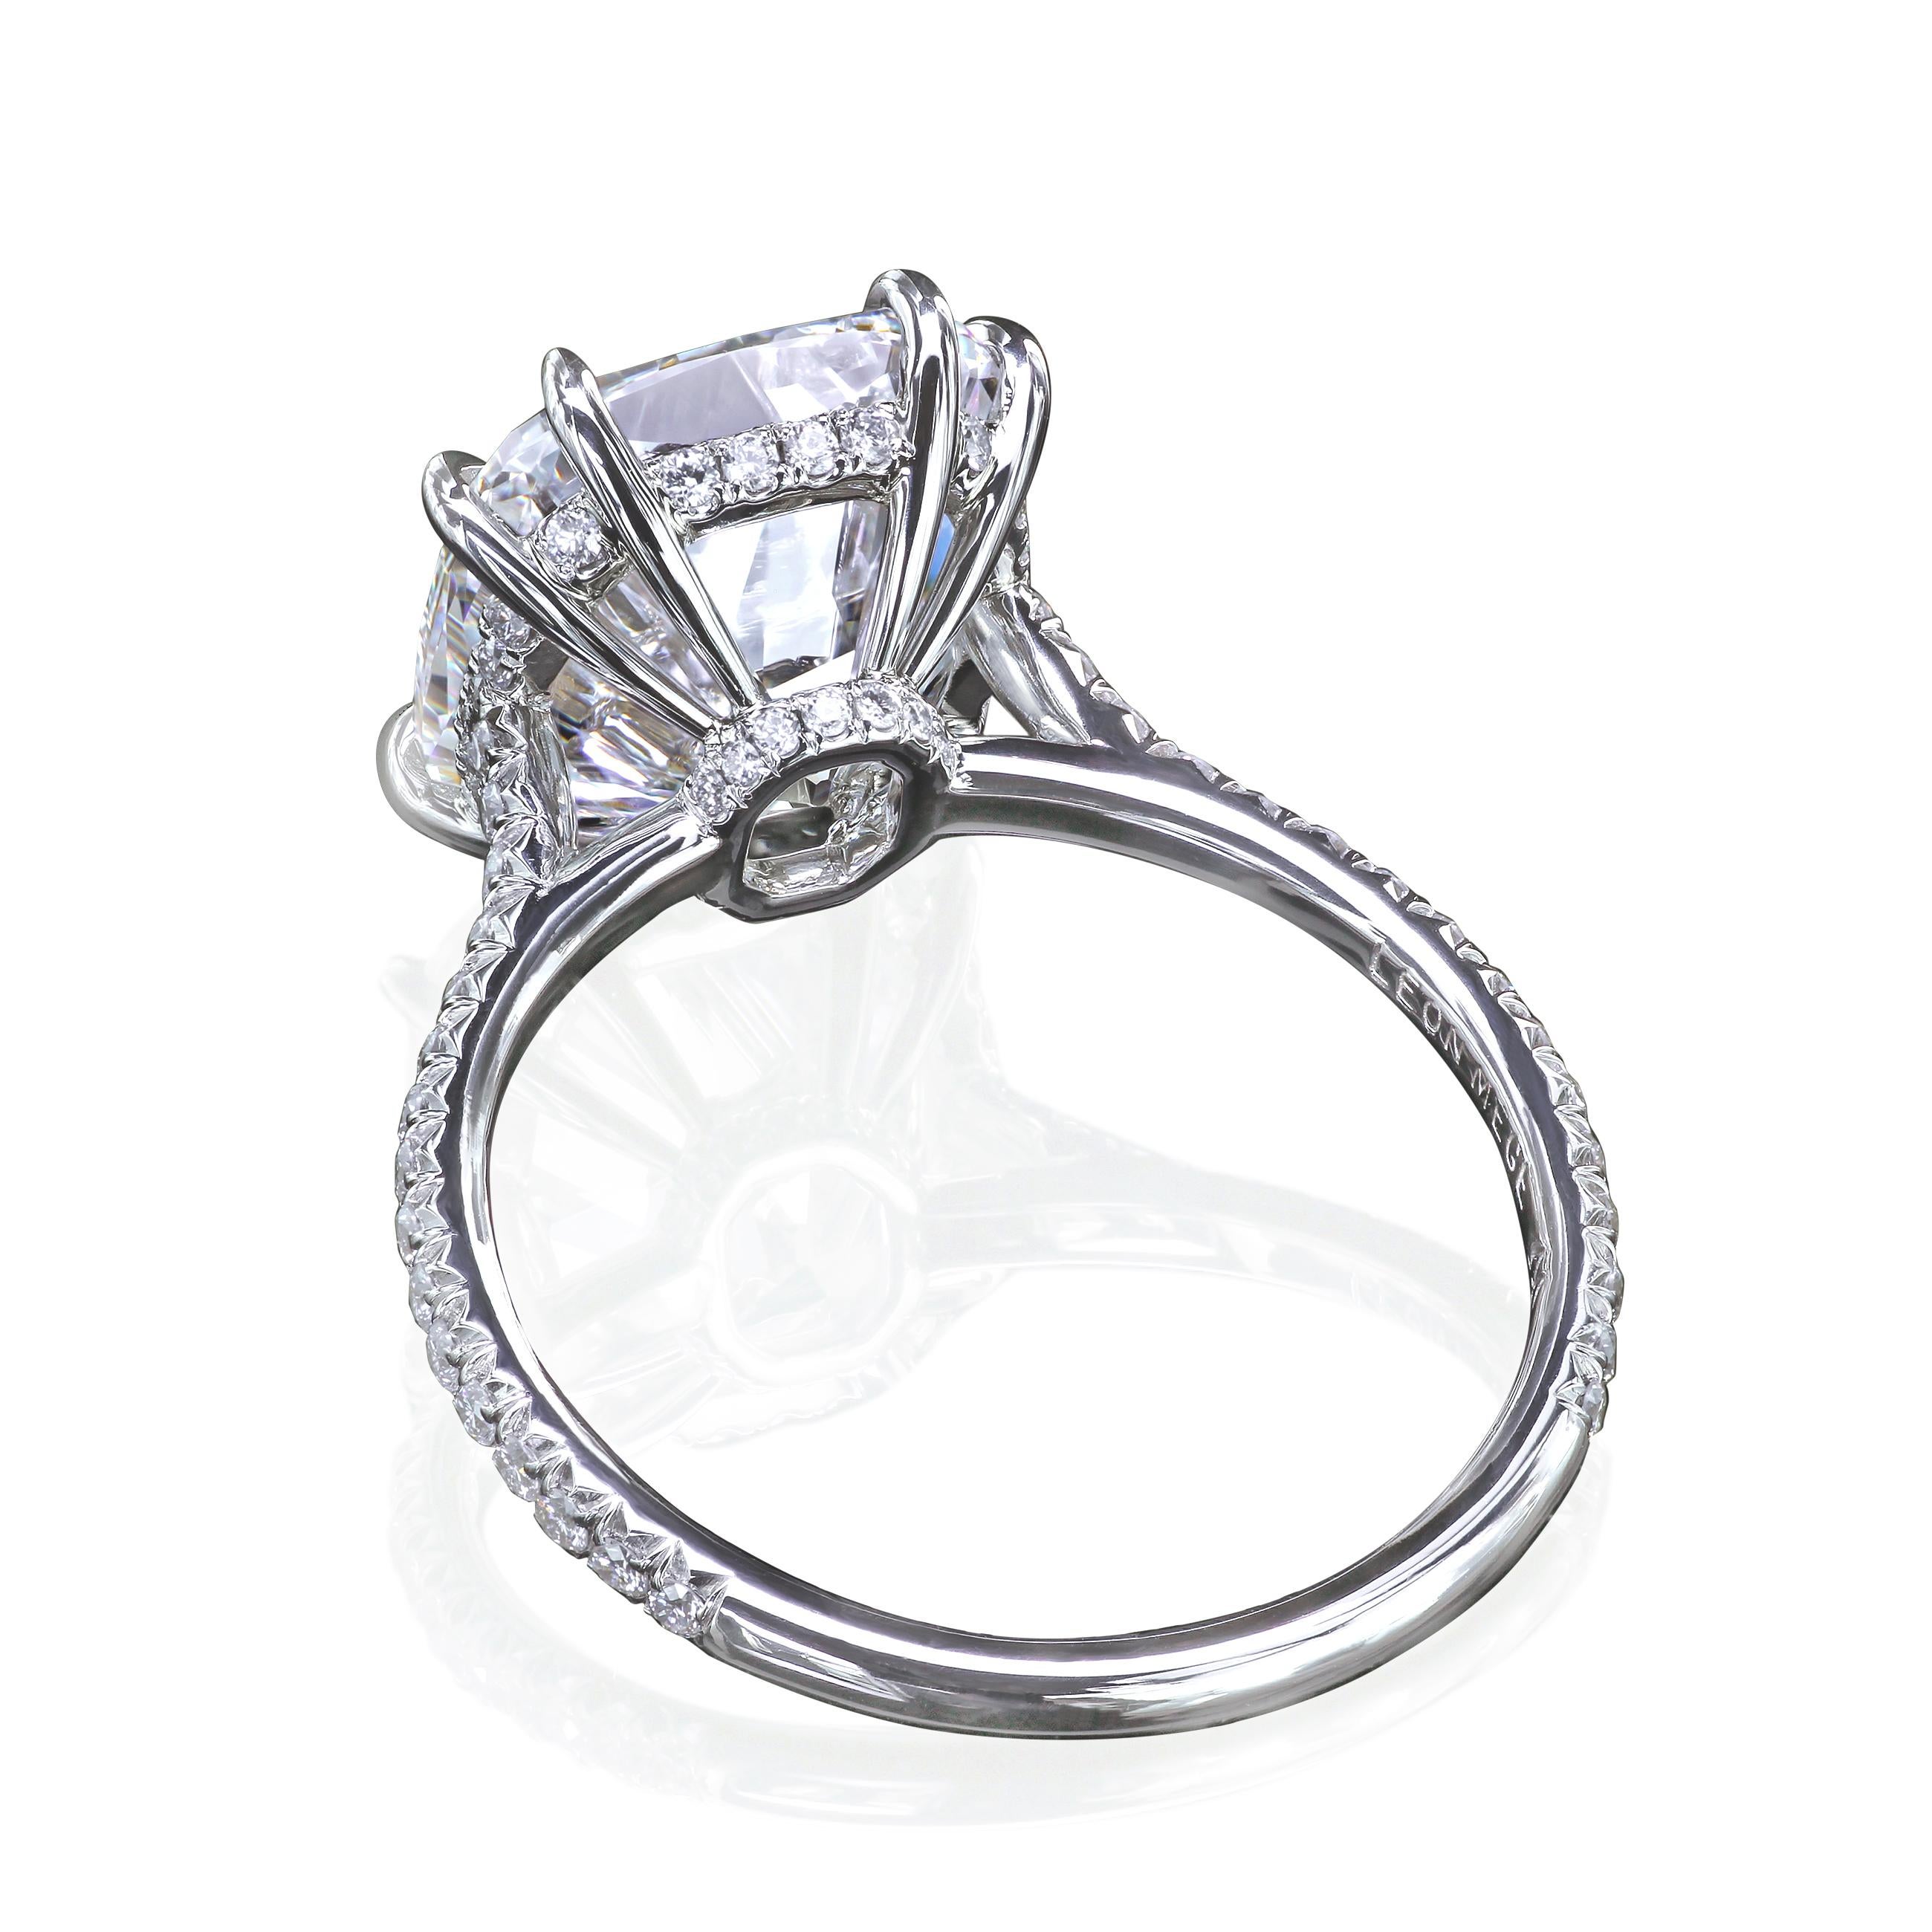 Solitaire engagement ring featuring a True Antique cushion cut diamond at the center.
The timeless design is completed with micro pave diamonds on the basket holding the diamond and cathedral shank.
Hand-forged platinum

All fine details of the